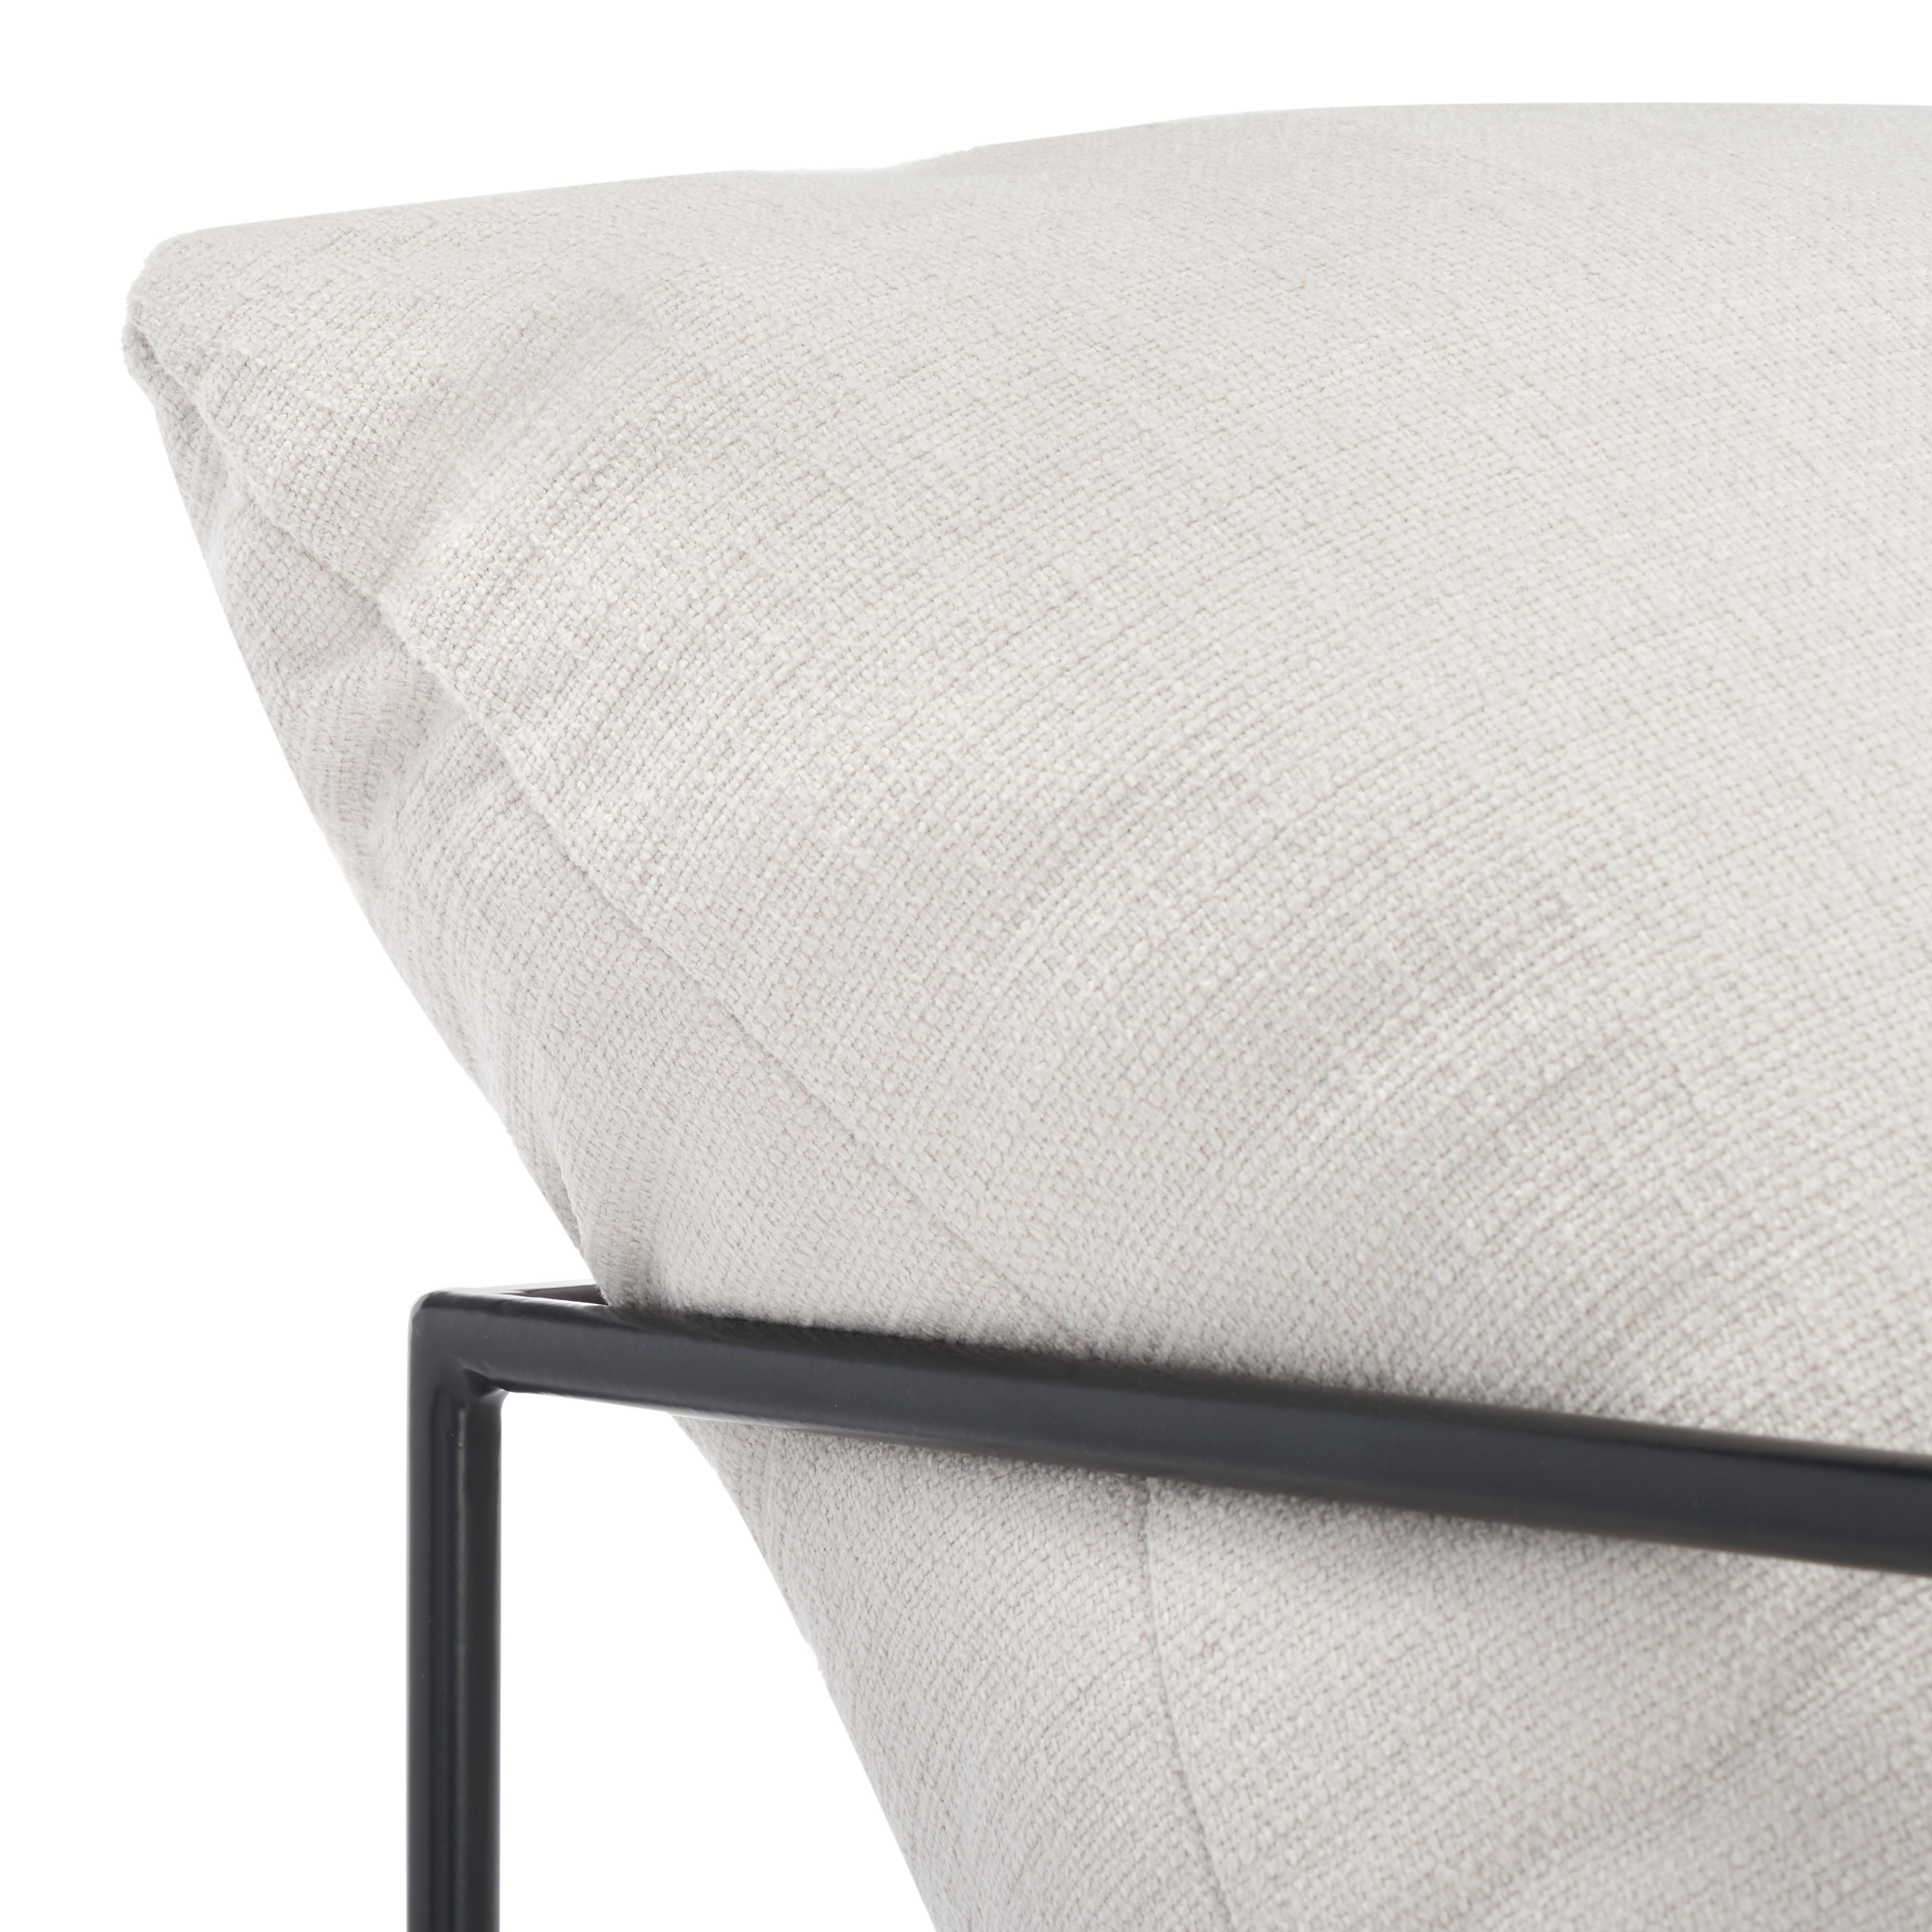 Portland Pillow Top Accent Chair - Ivory/Black - Safavieh - Image 6